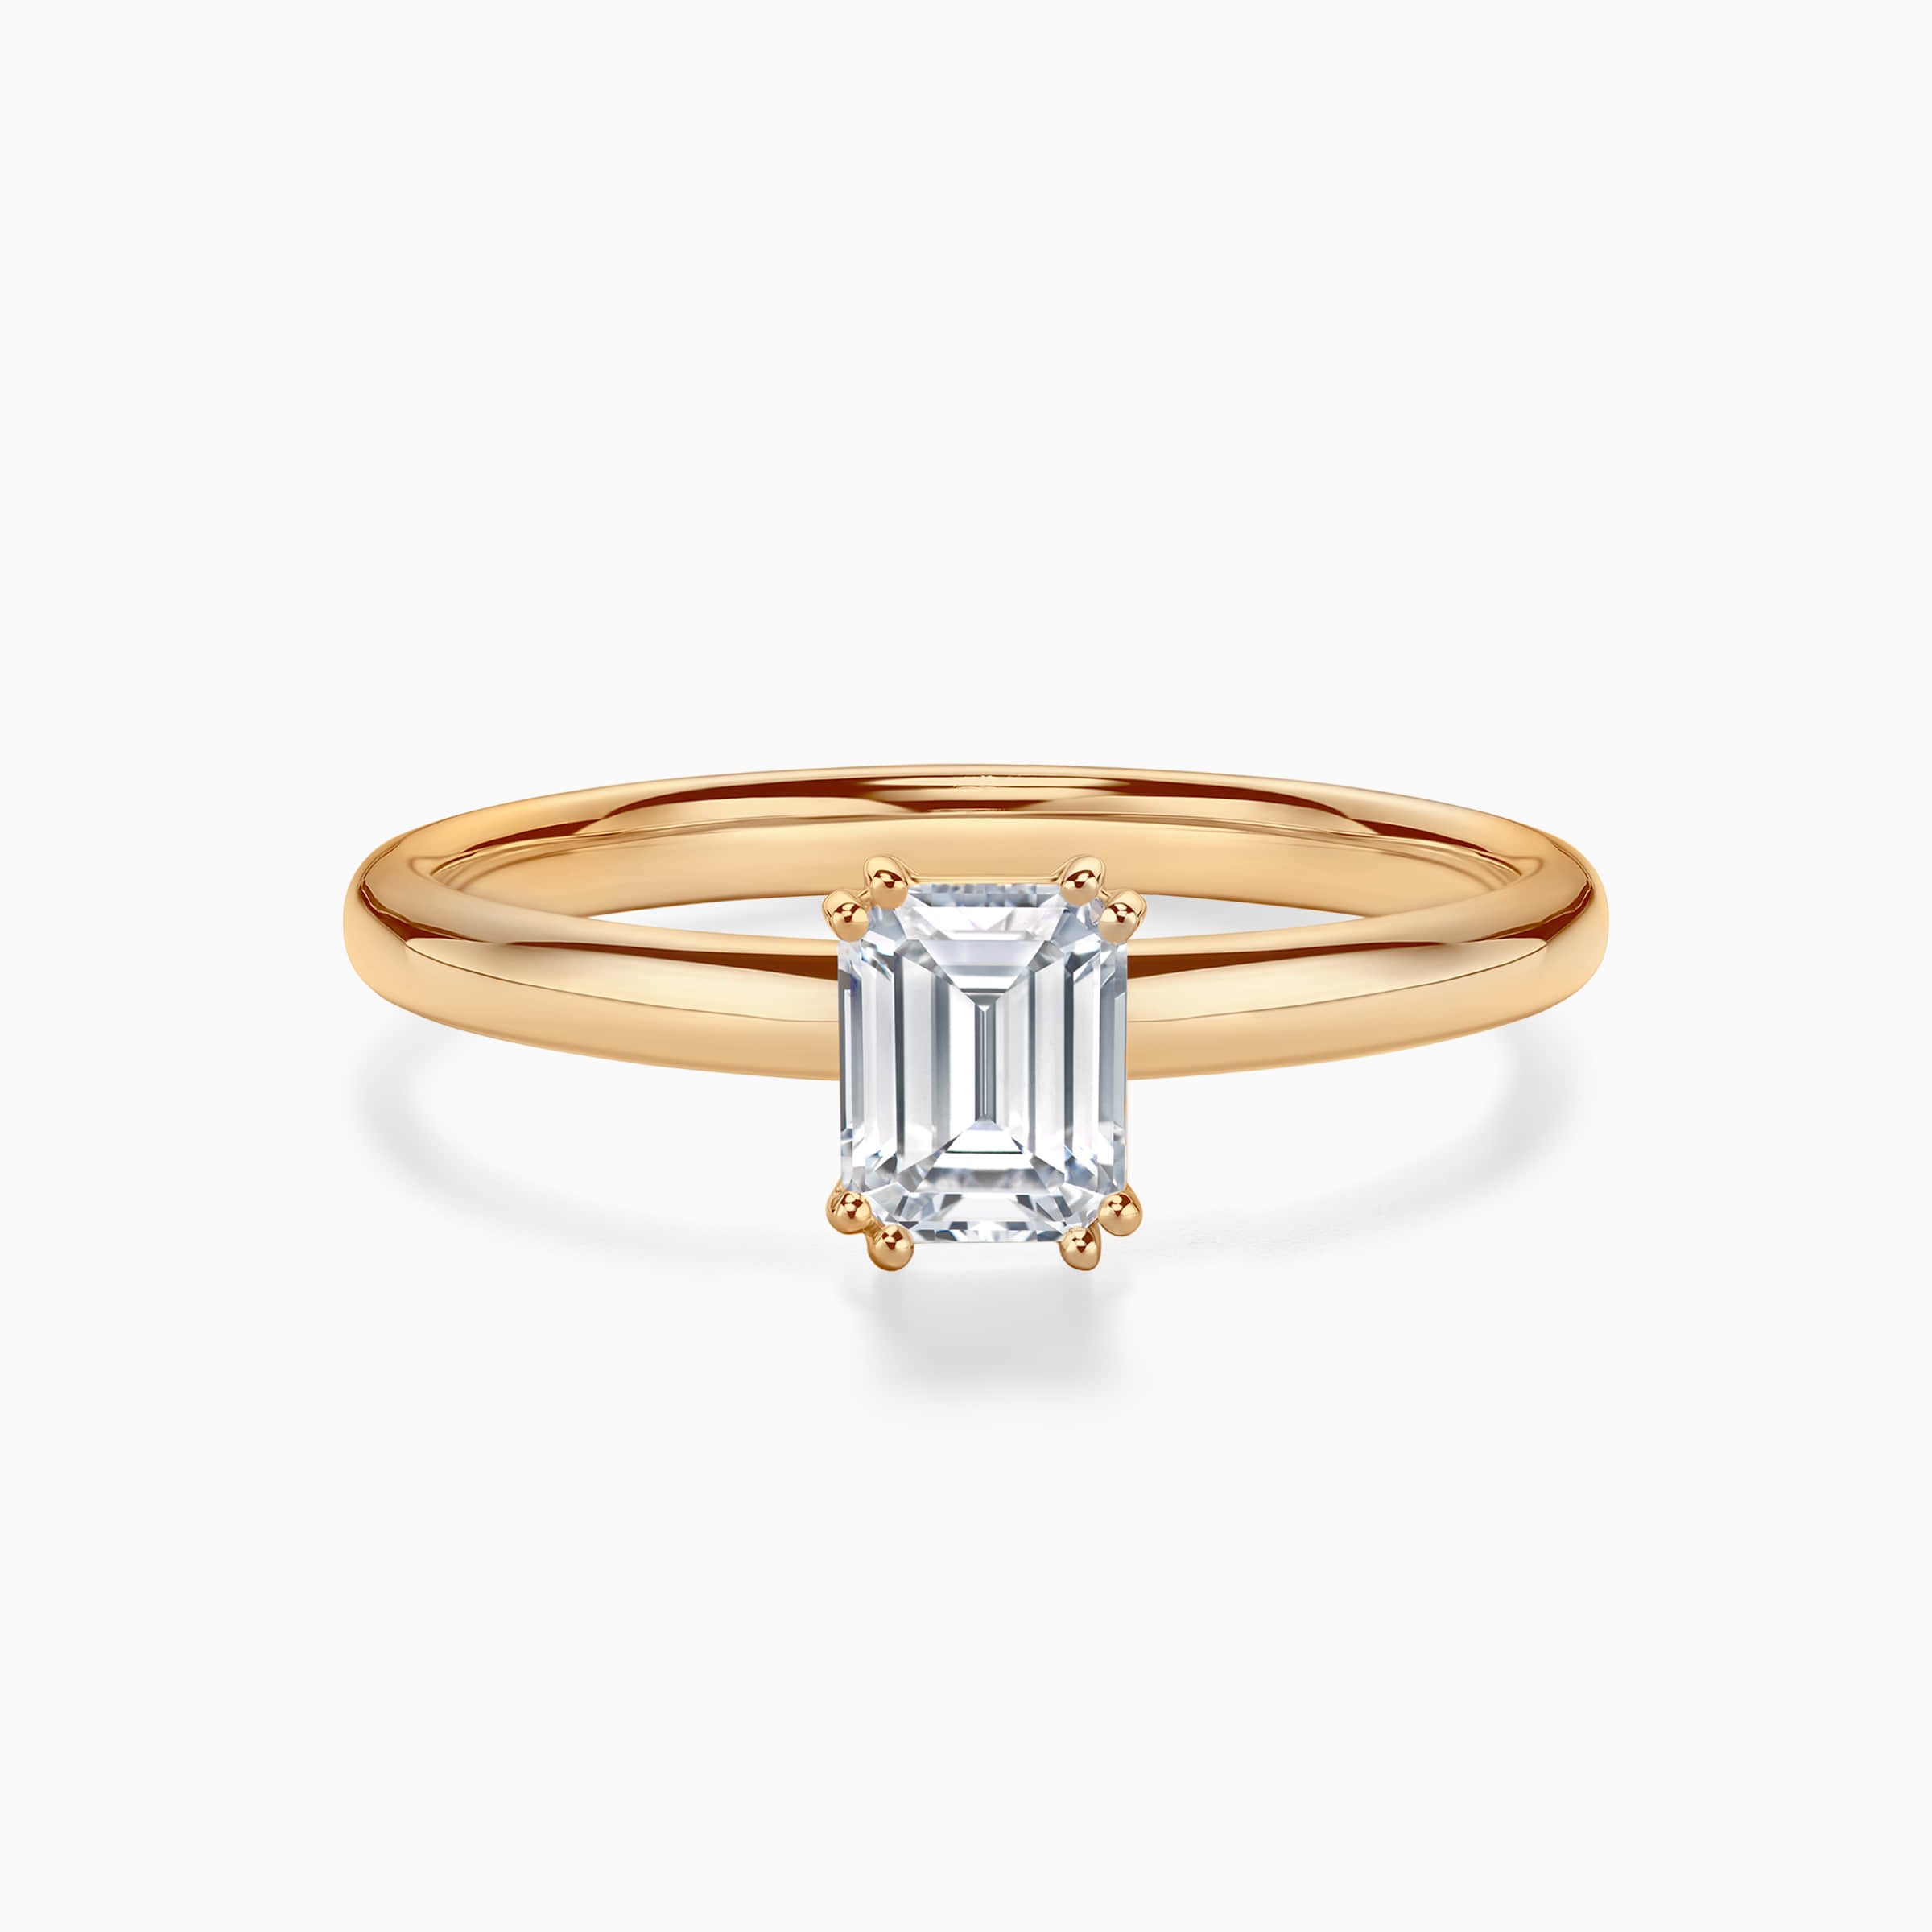 DR forever emerald cut solitaire ring yellow gold